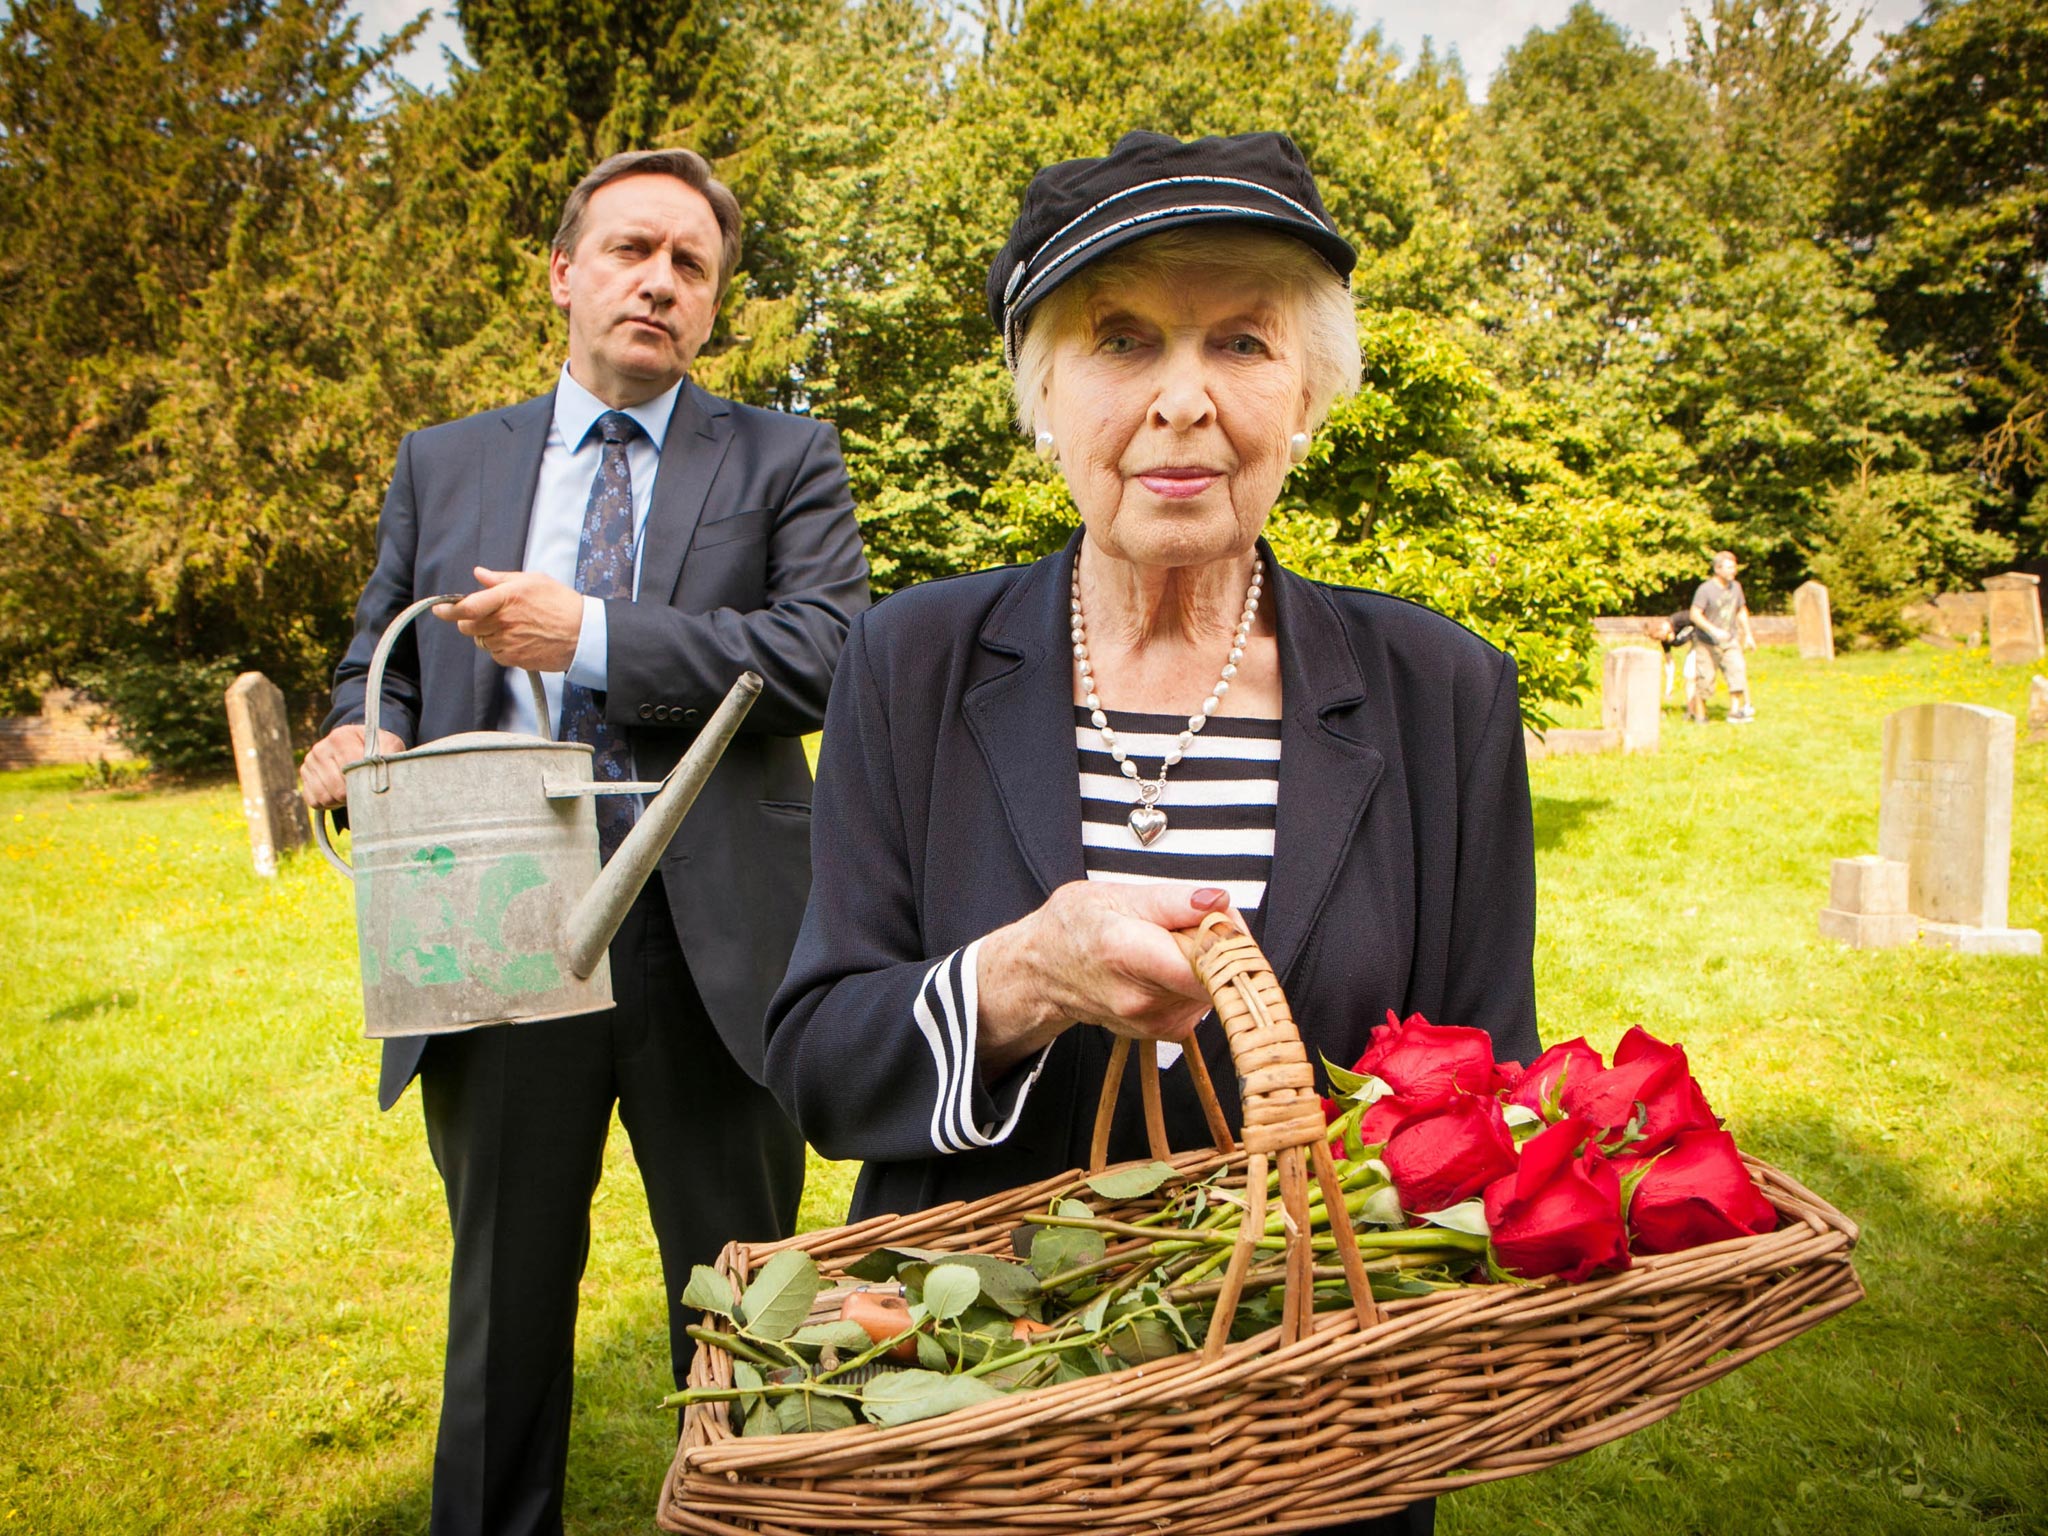 Midsomer’s Murders Are Affecting Public Health Messages